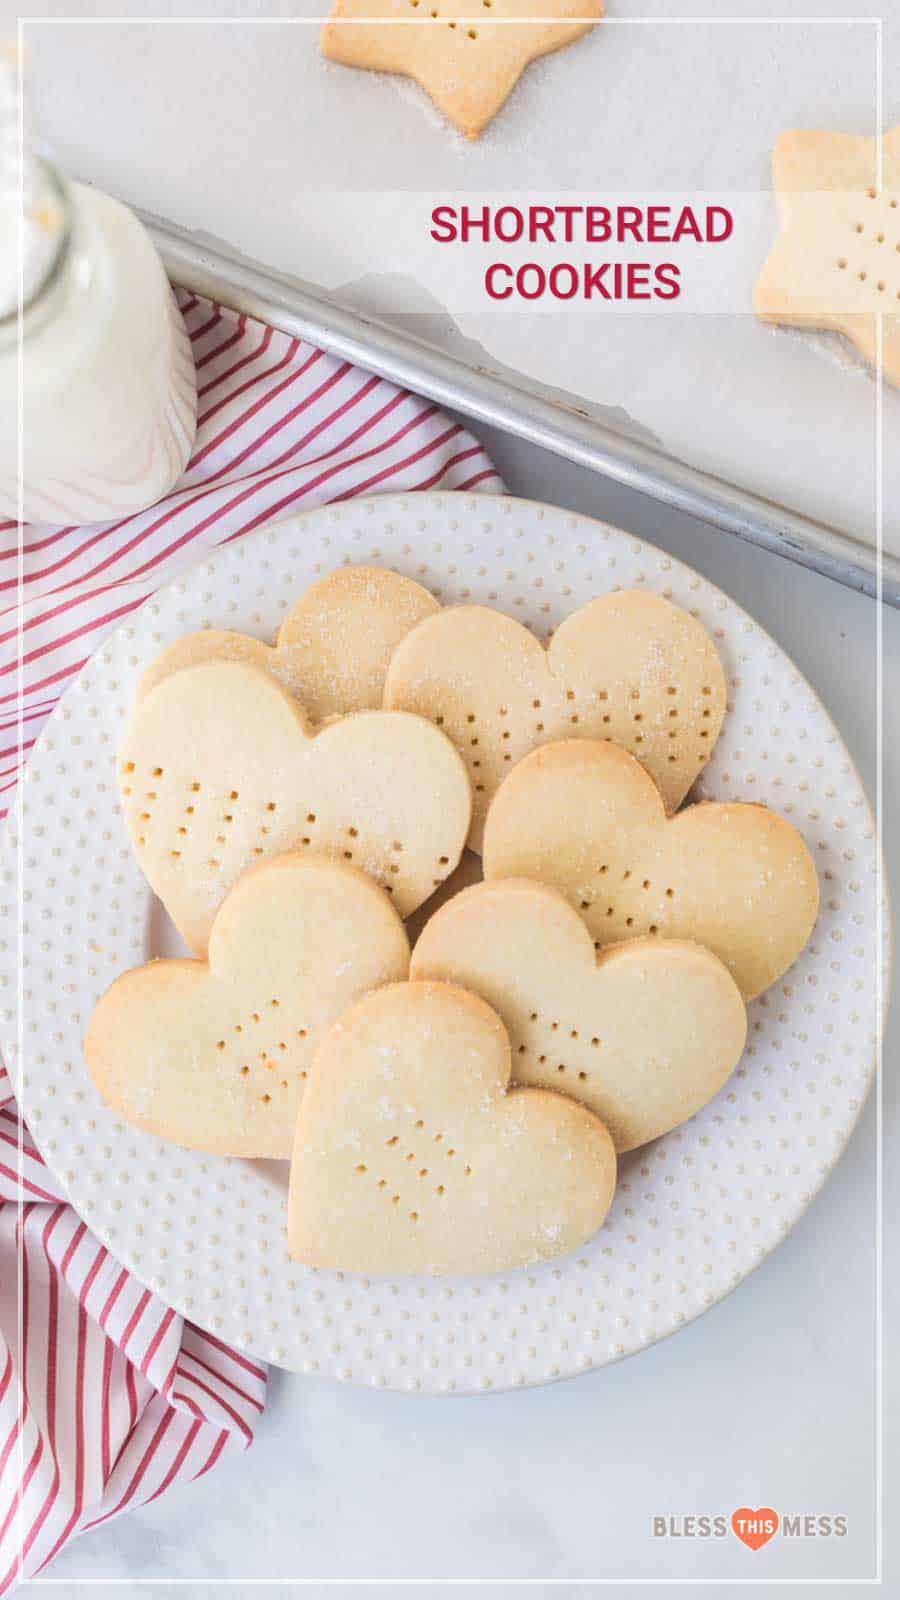 Easy shortbread cookies are crunchy, crumbly, and sweet (both to eat and look at!) and are so simple and fun to bake. You can feel the coziness in your home grow stronger when the wafting smell of these easy cookies fills your space, and it's kinda the best thing ever. #shortbreadcookies #cookies #shortbread #shortbreadcookierecipe #baking #cookierecipe